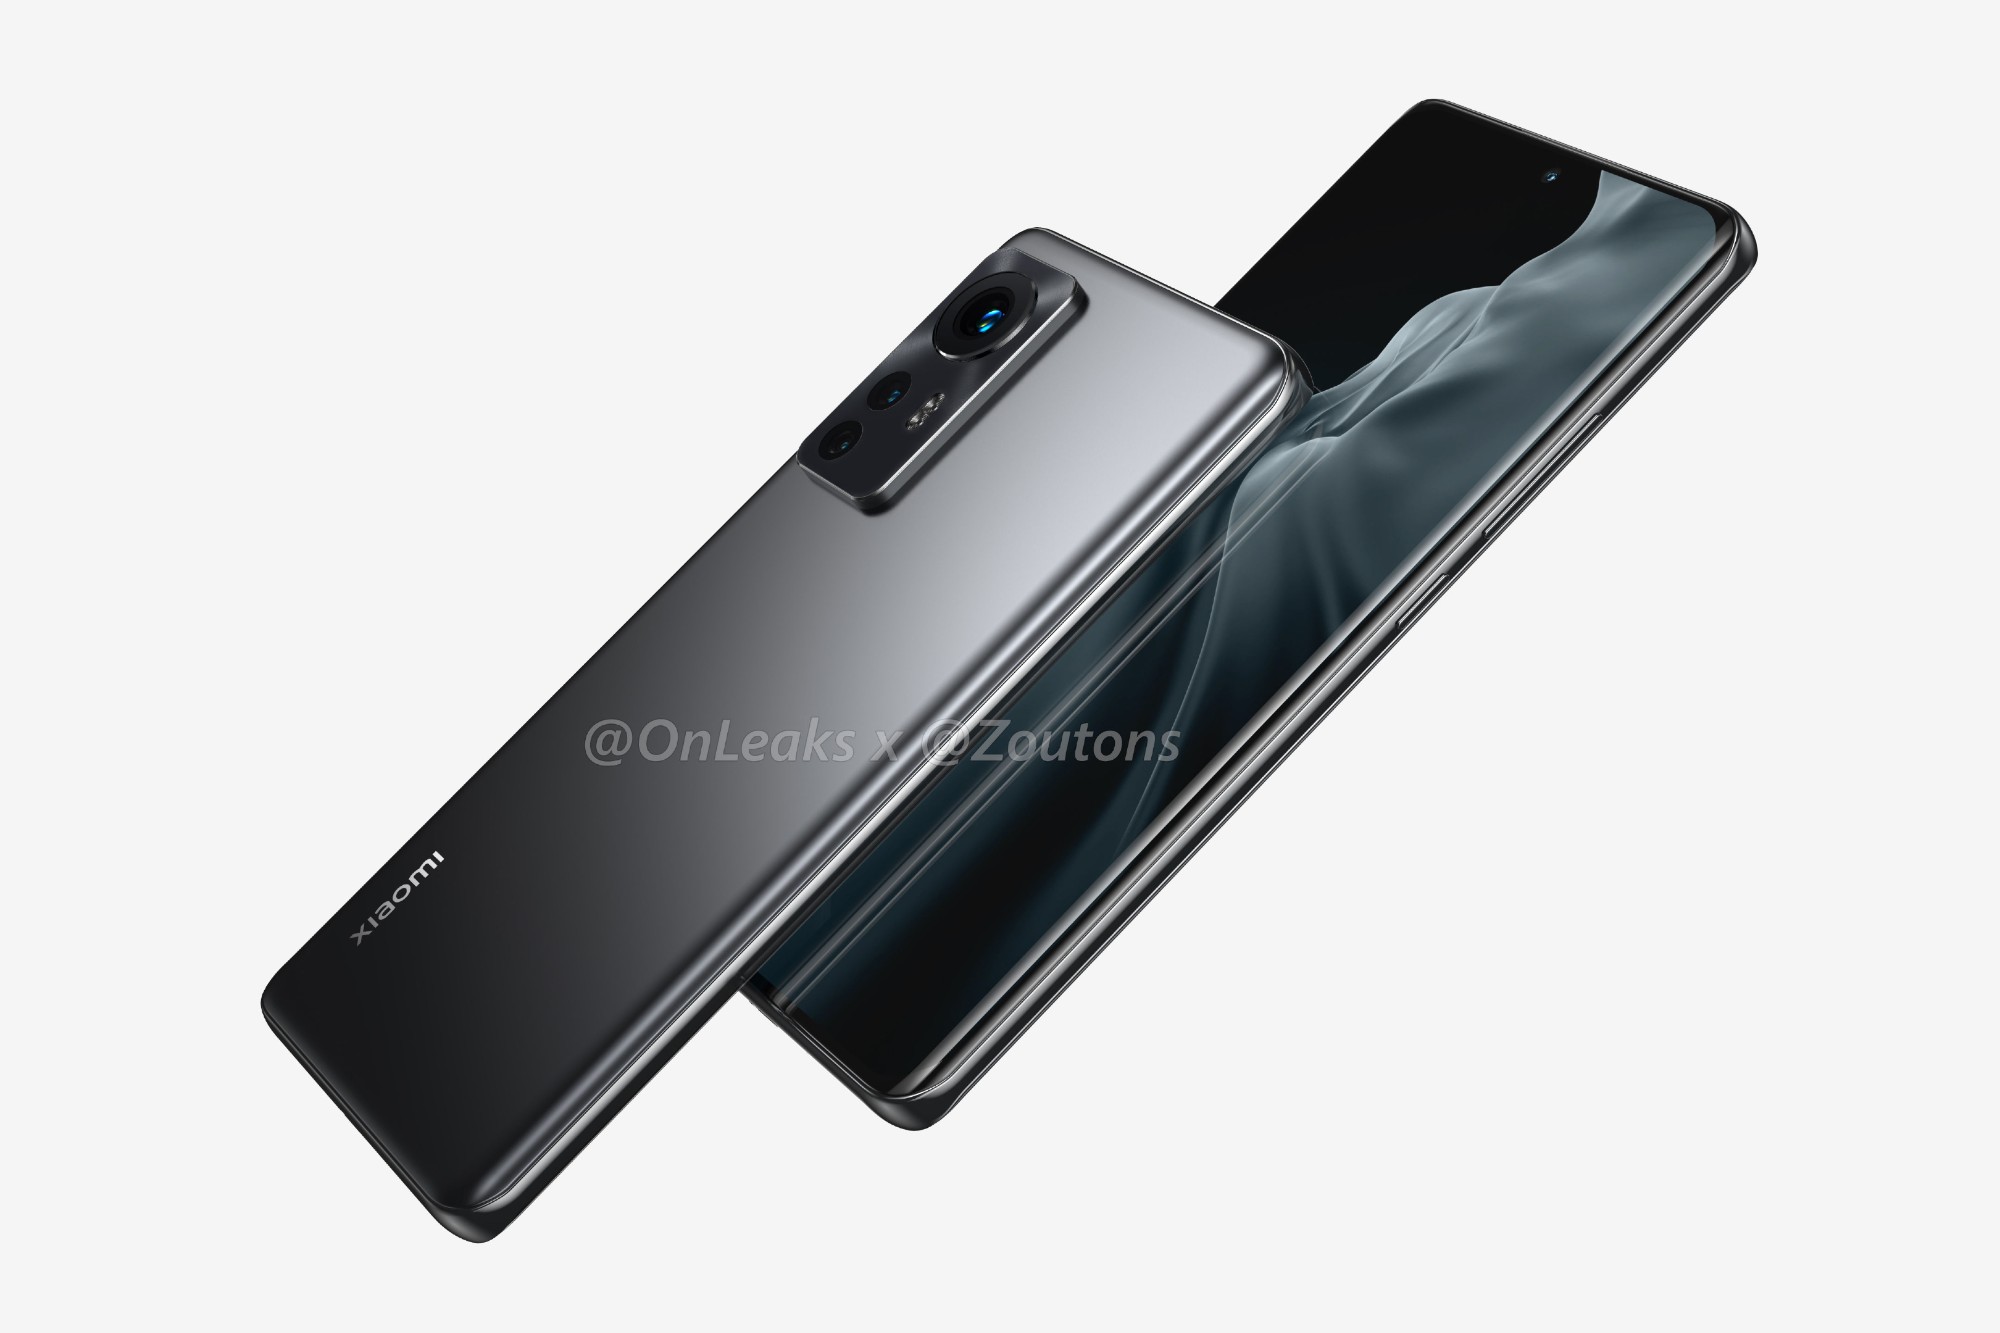 First renders of the Xiaomi 12 smartphone showing the front and rear panels.